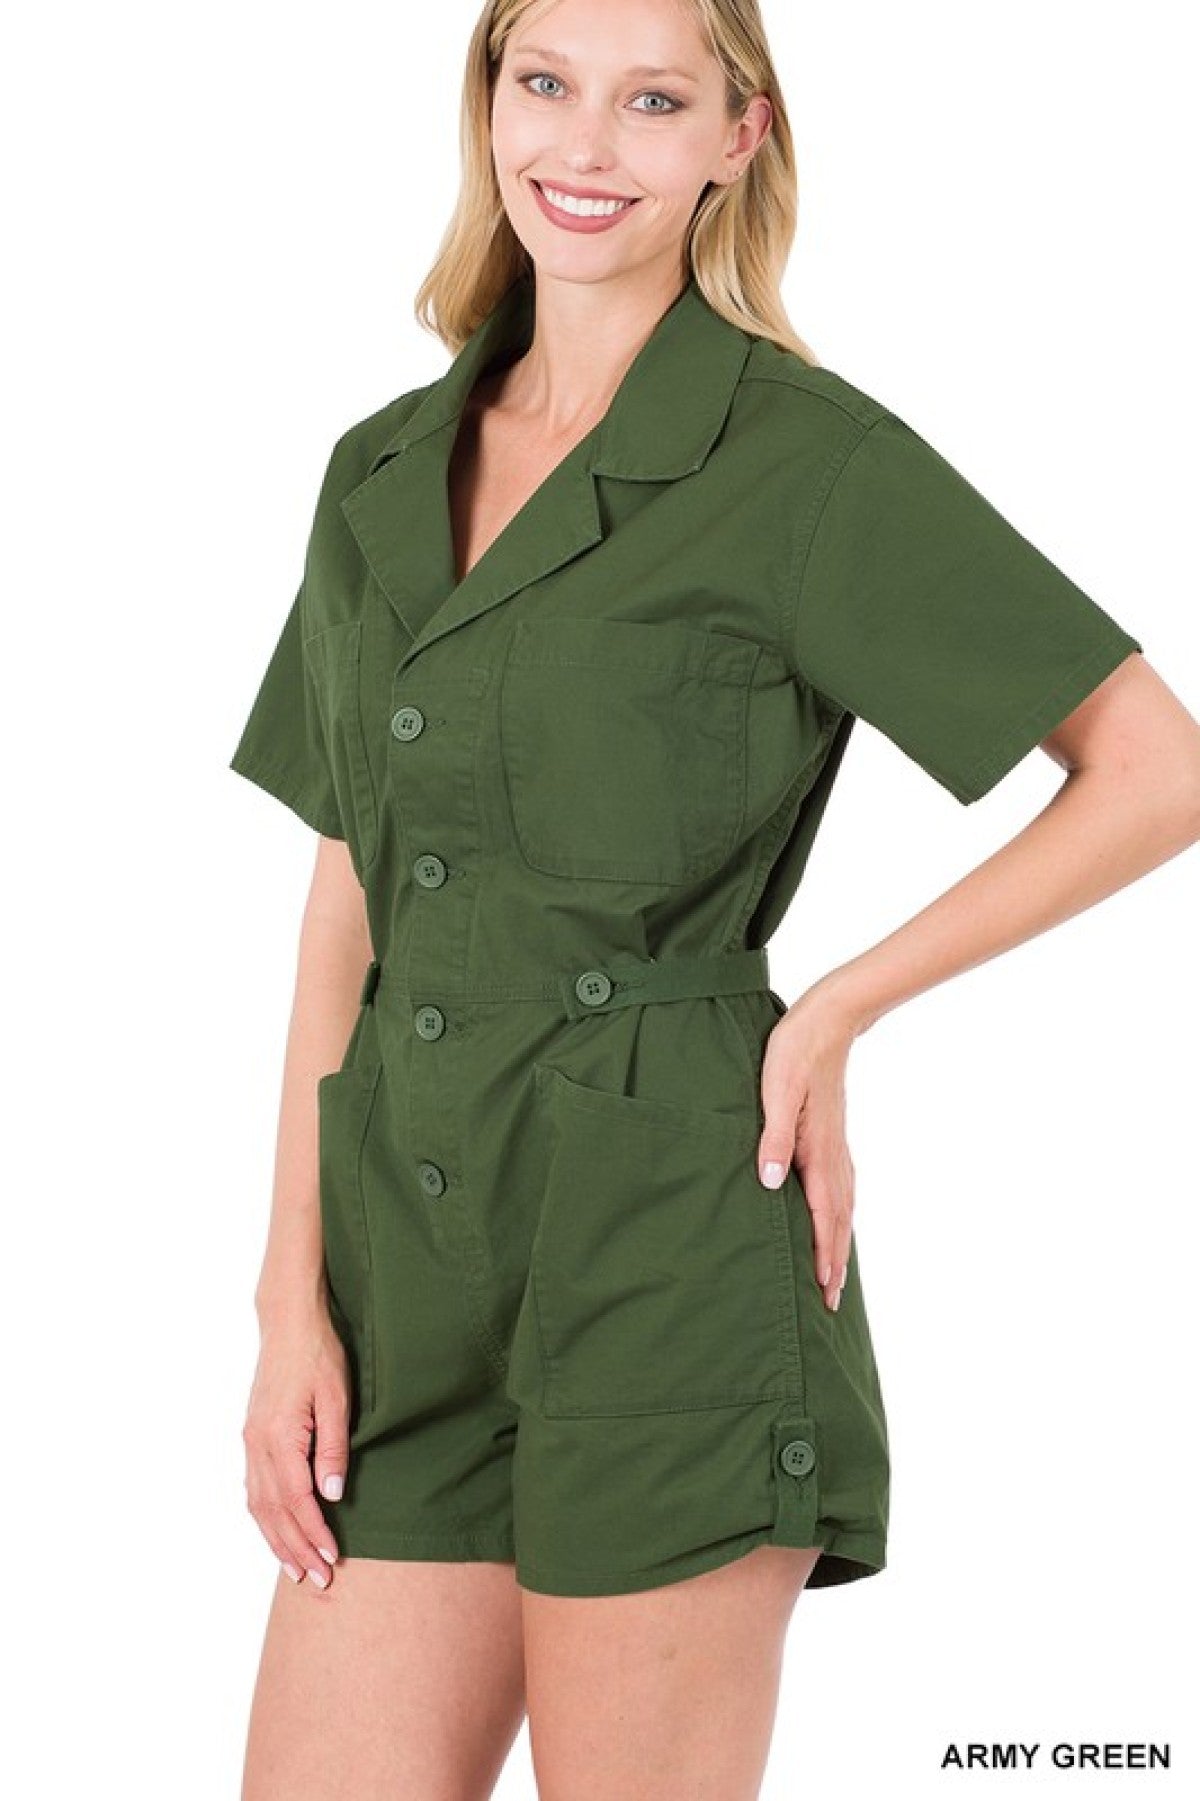 ARMY GREEN - Zenana Woven Cotton Button Front Shirt Romper - Ships from The US - womens rompers at TFC&H Co.